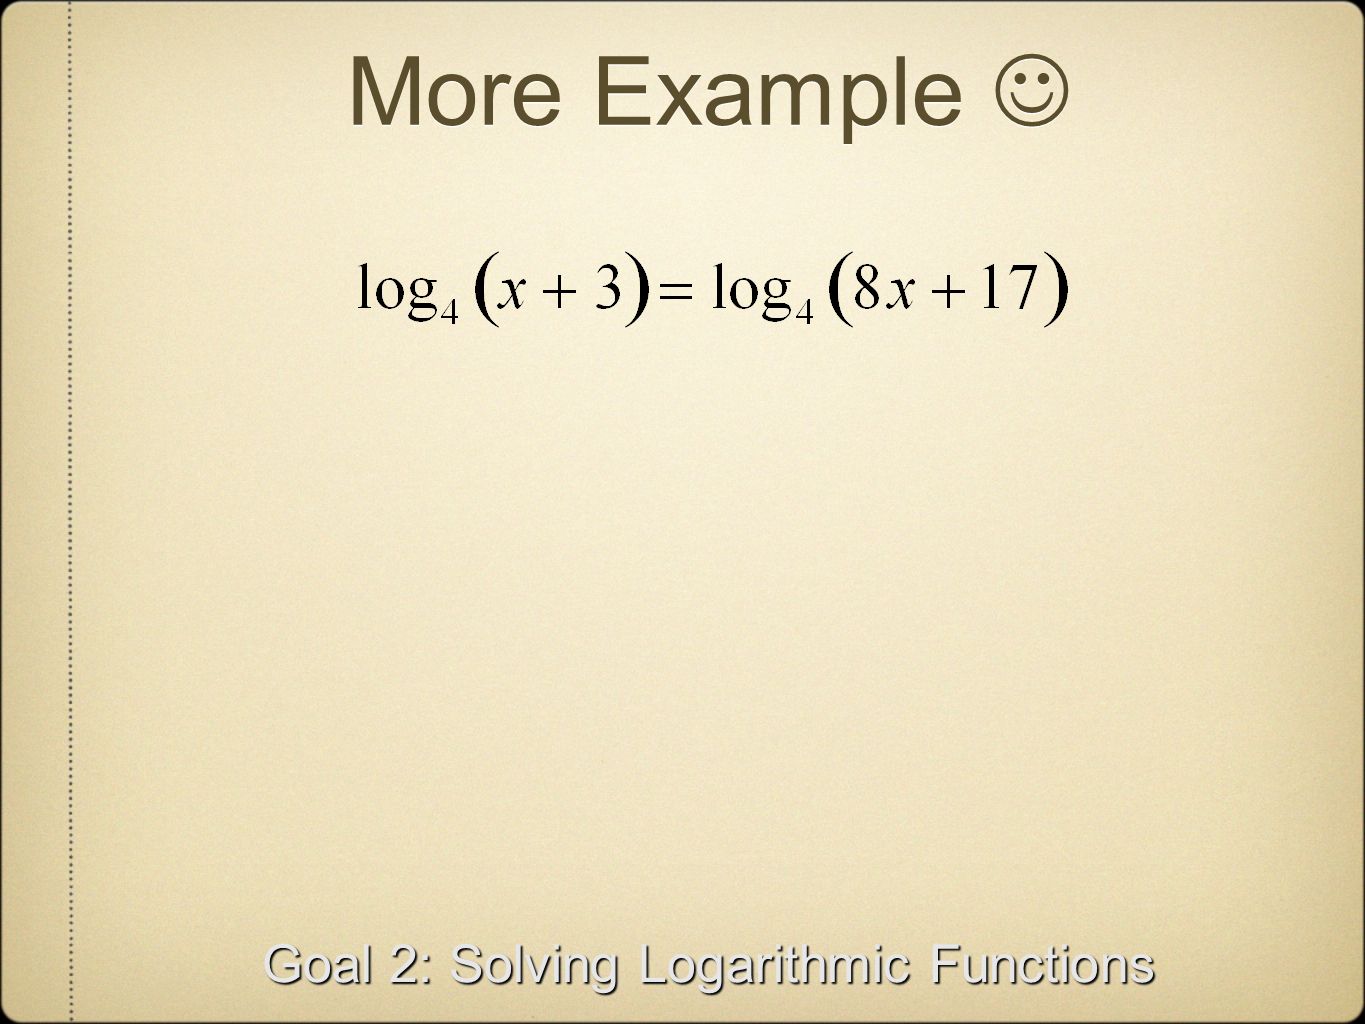 More Example Goal 2: Solving Logarithmic Functions